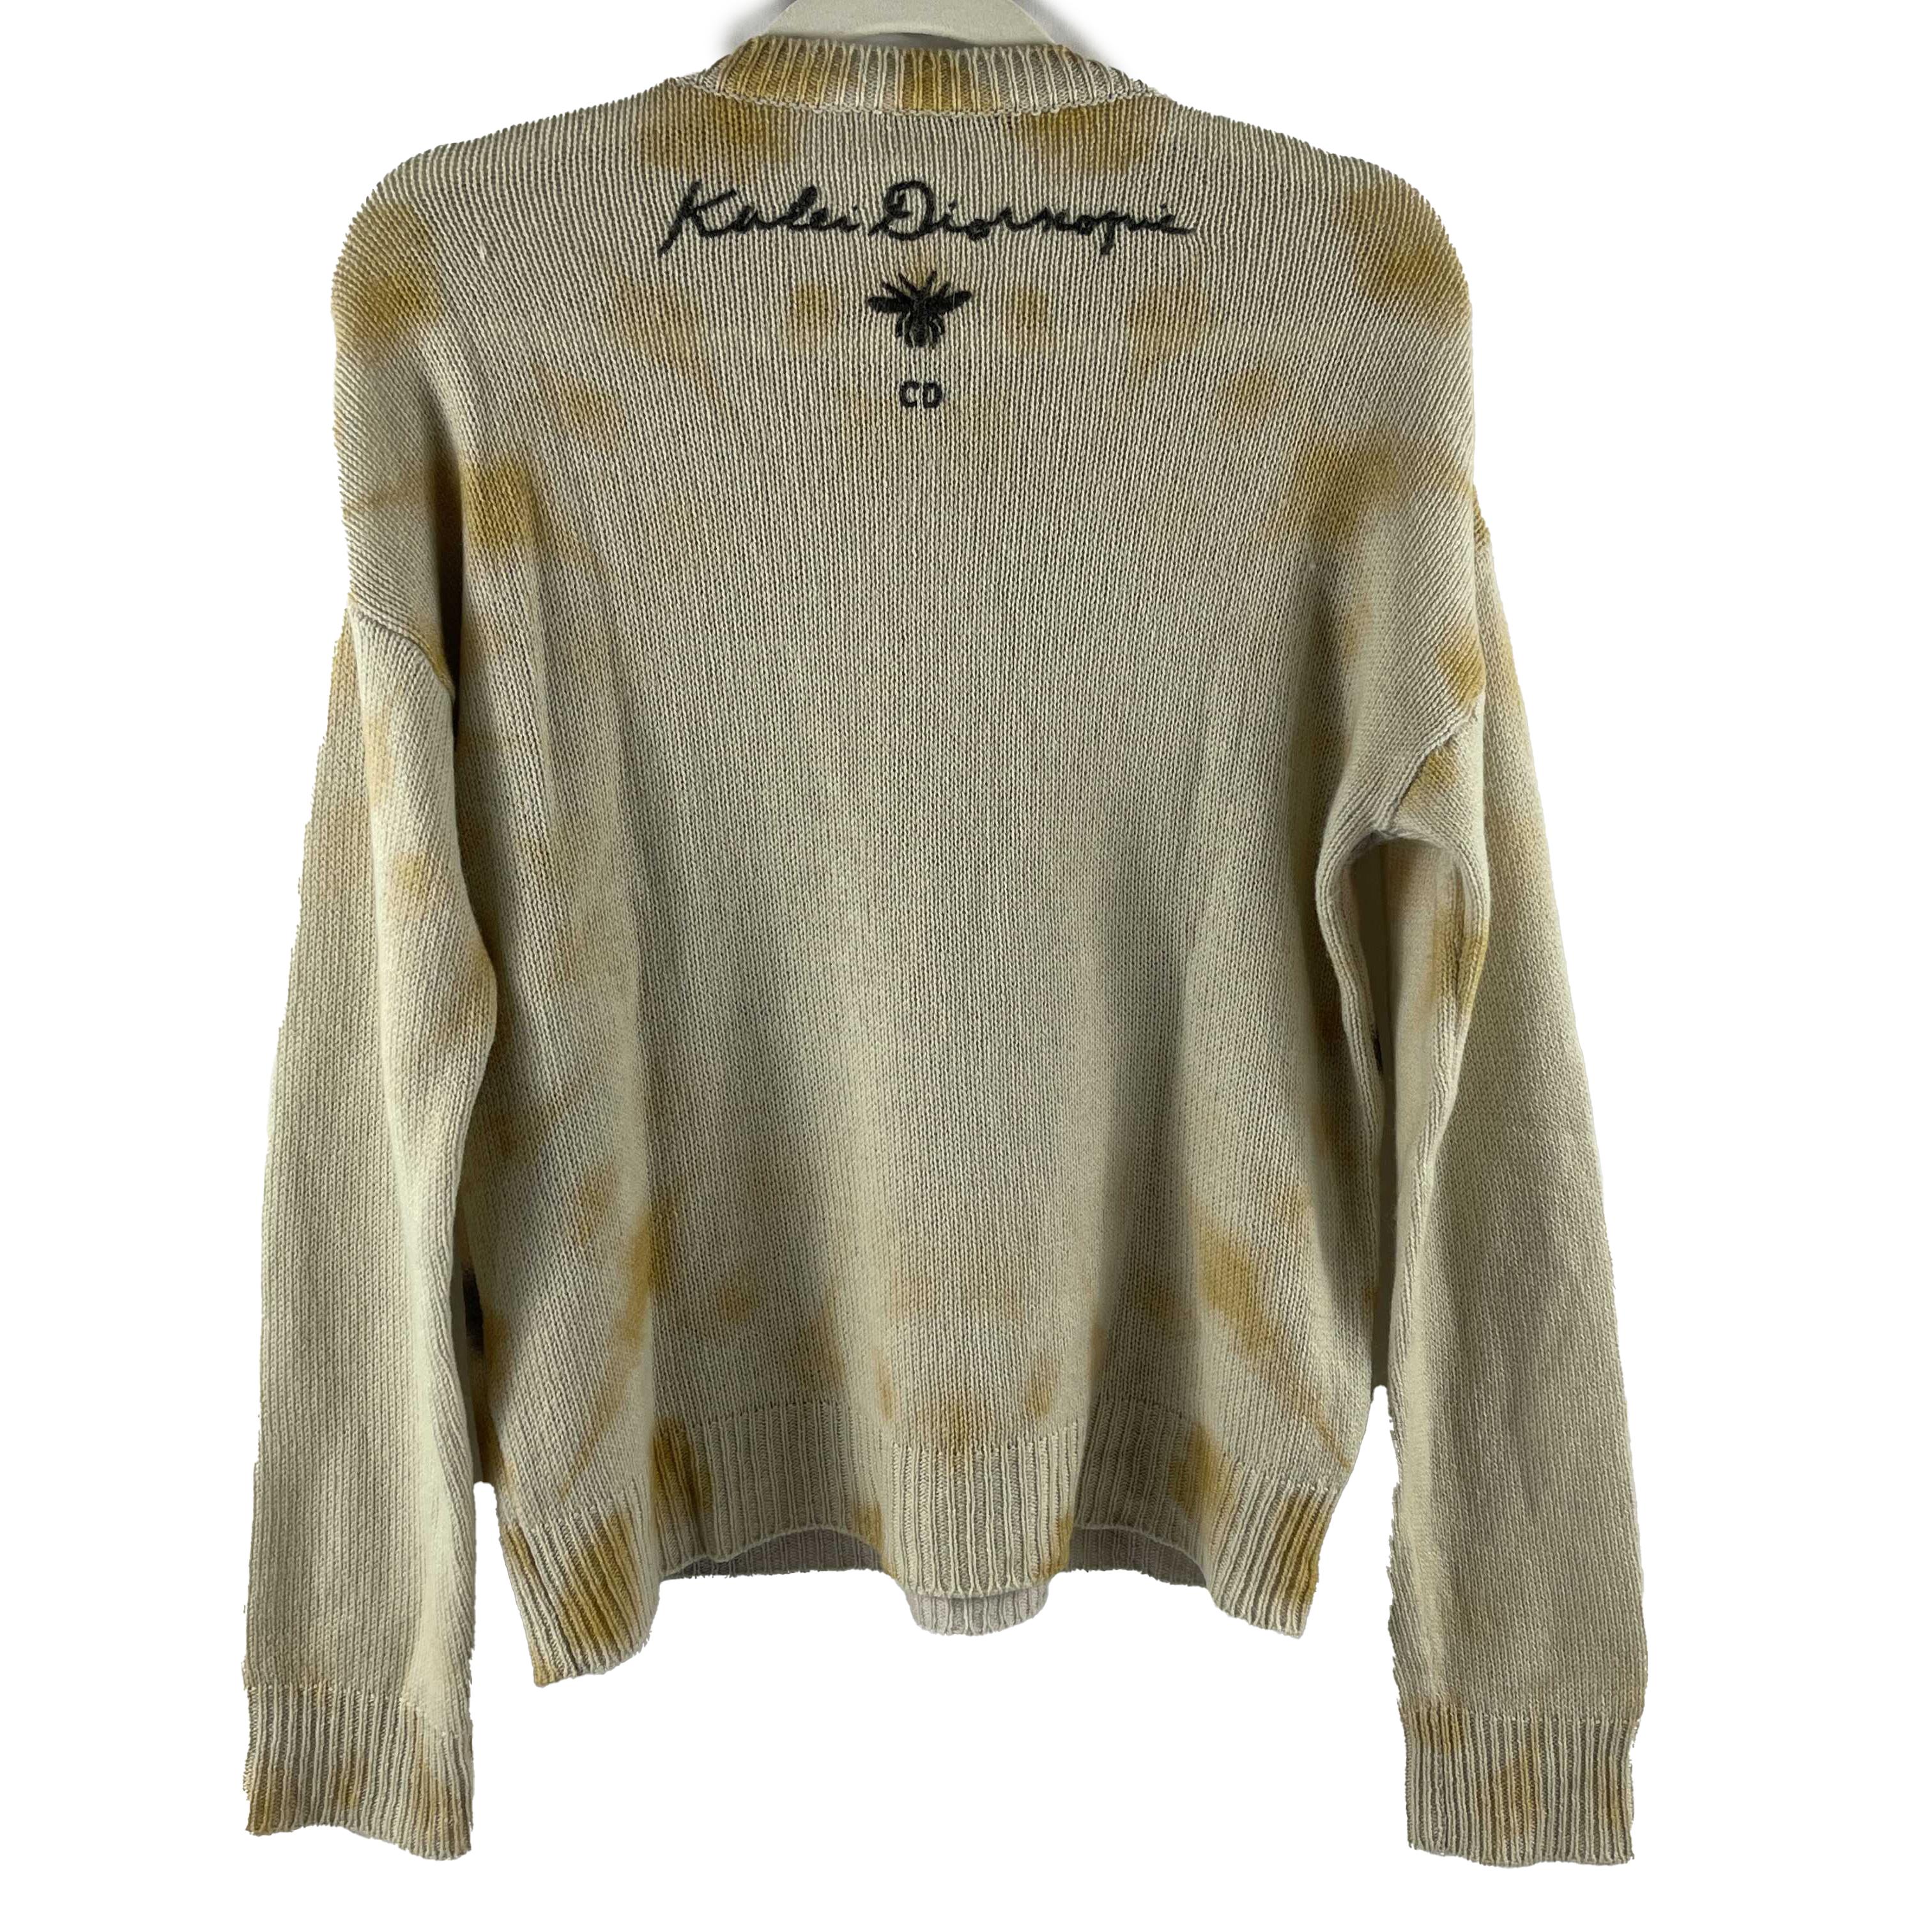 Christian Dior - Fantaisie Kalei Diorscopic Cashmere Sweater Top - 2 

Description

The Christian Dior long sleeve sweater is from the Summer 2019 Collection.
It is crafted with cashmere and contains a crew neck style collar.
It features a